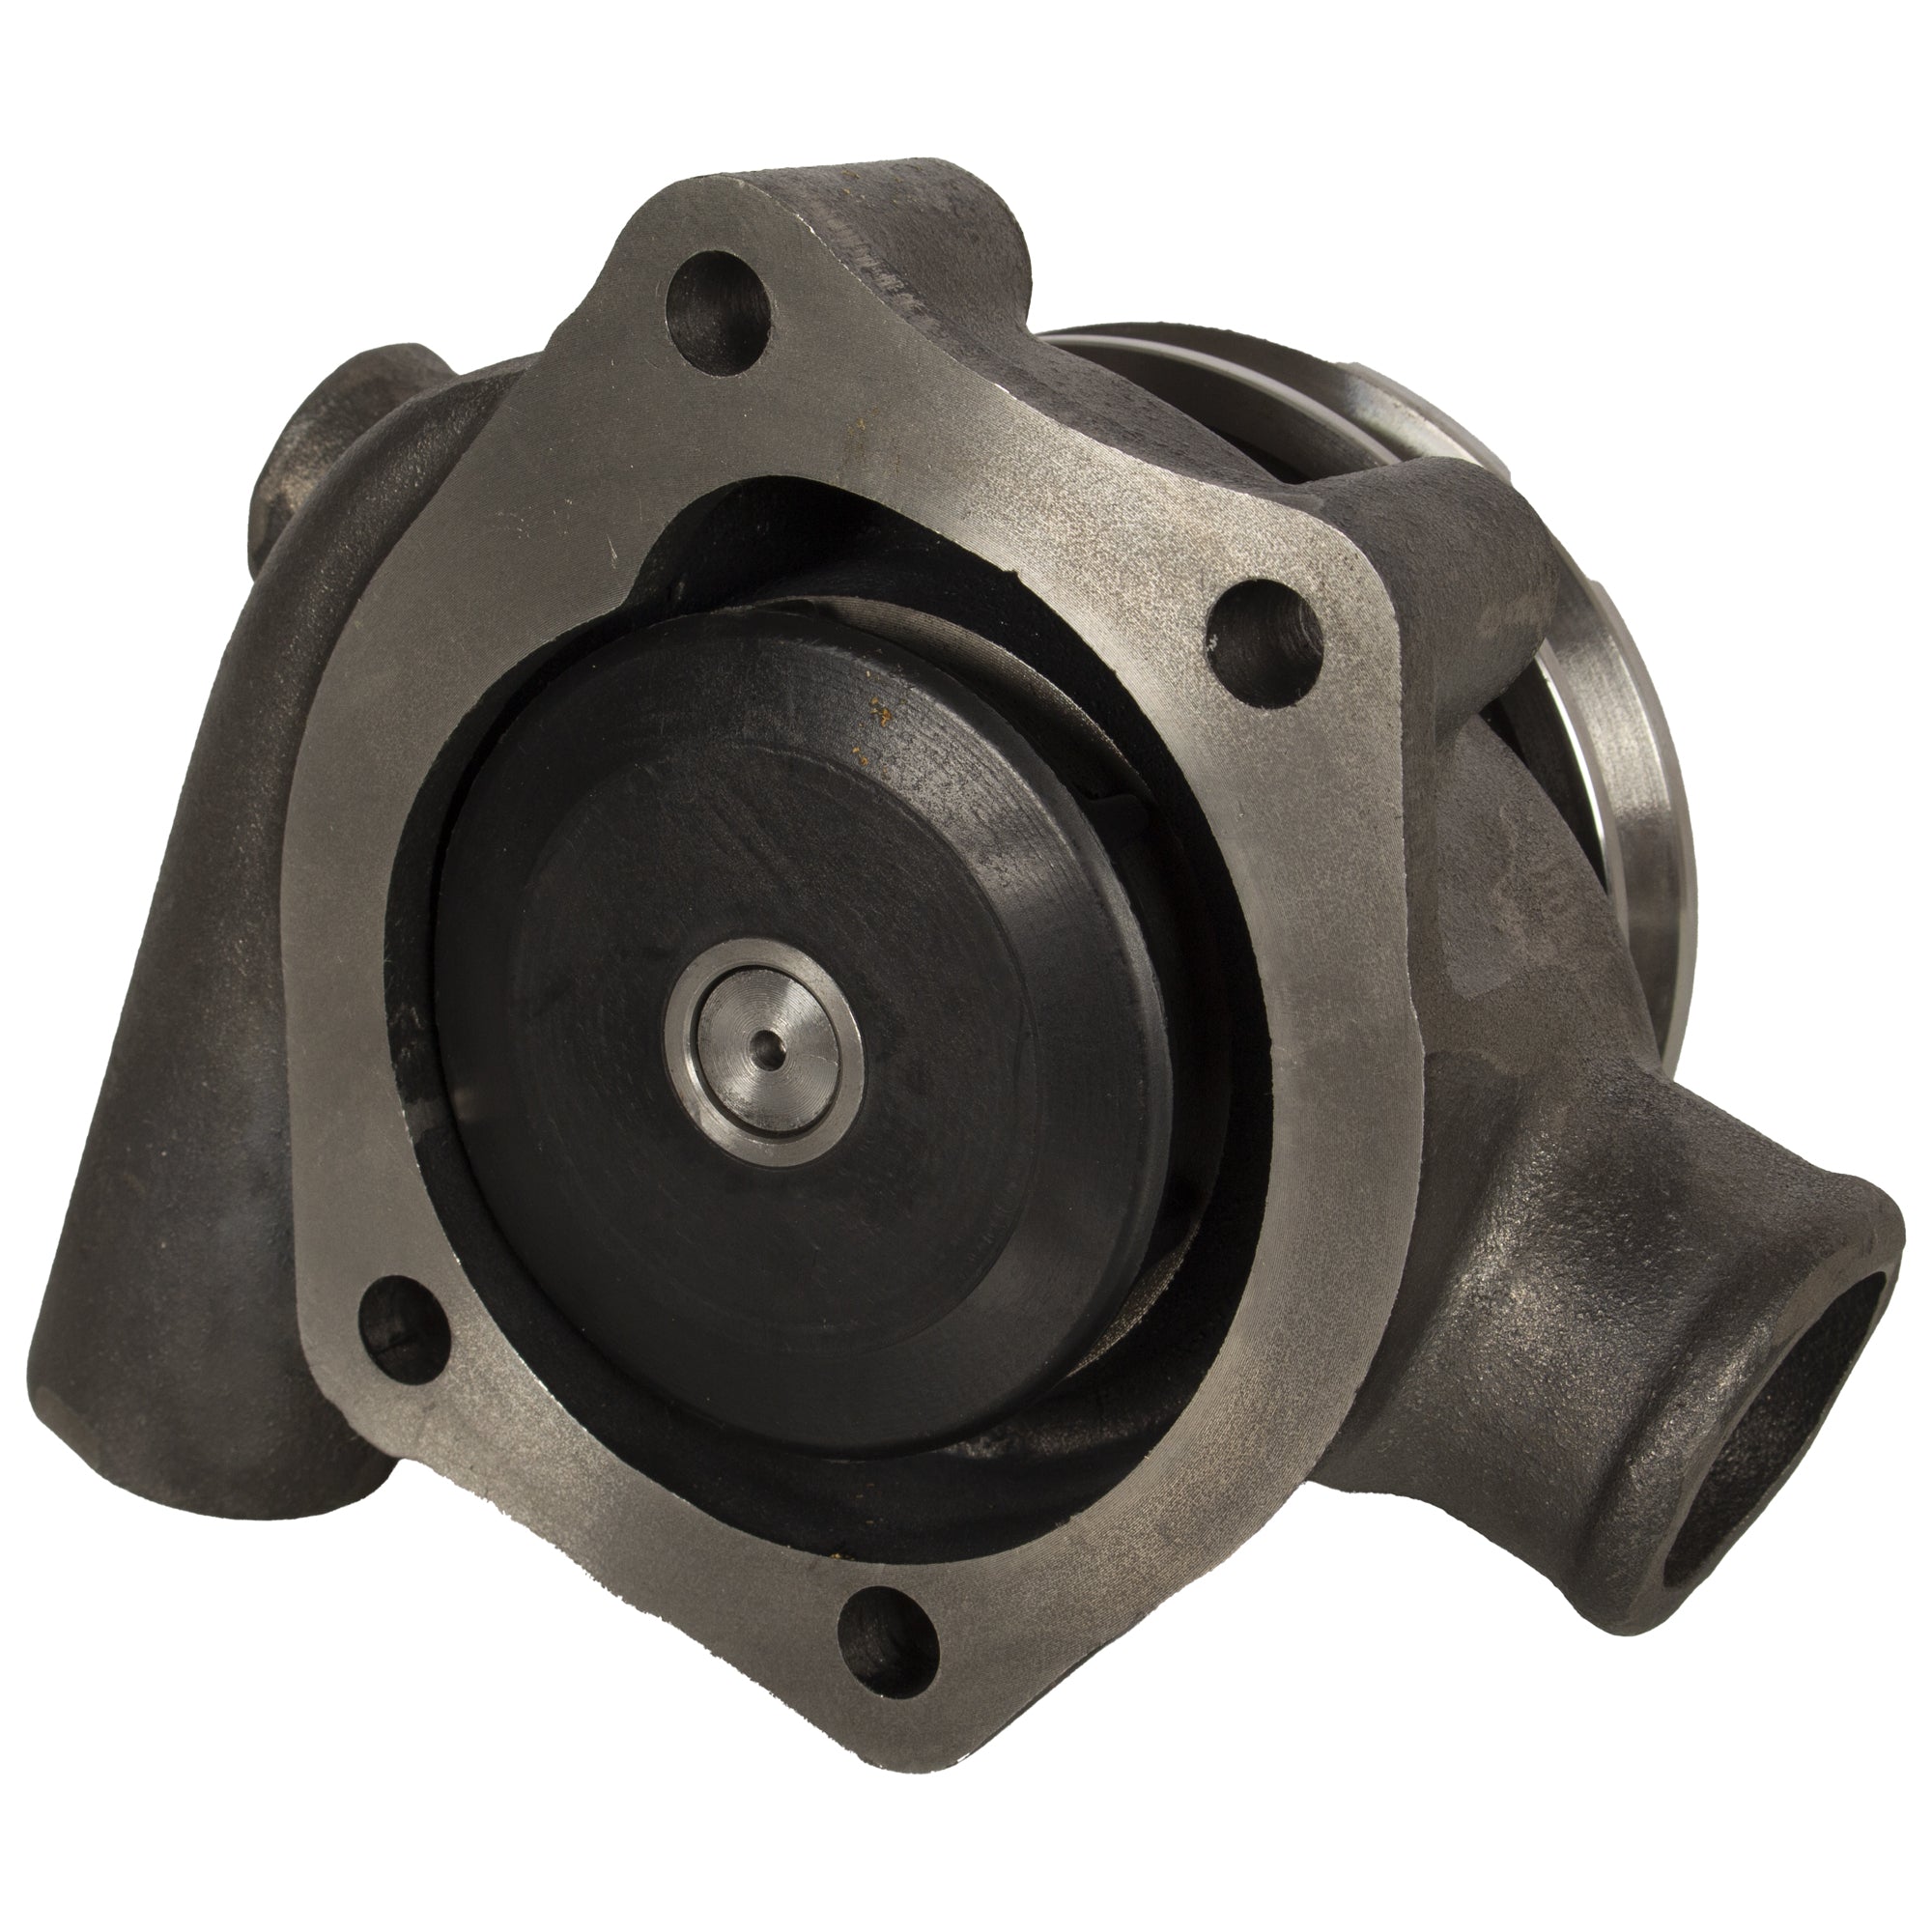 Water Pump Replacement for Perkins Engine; A6-305 41312207, 41312518